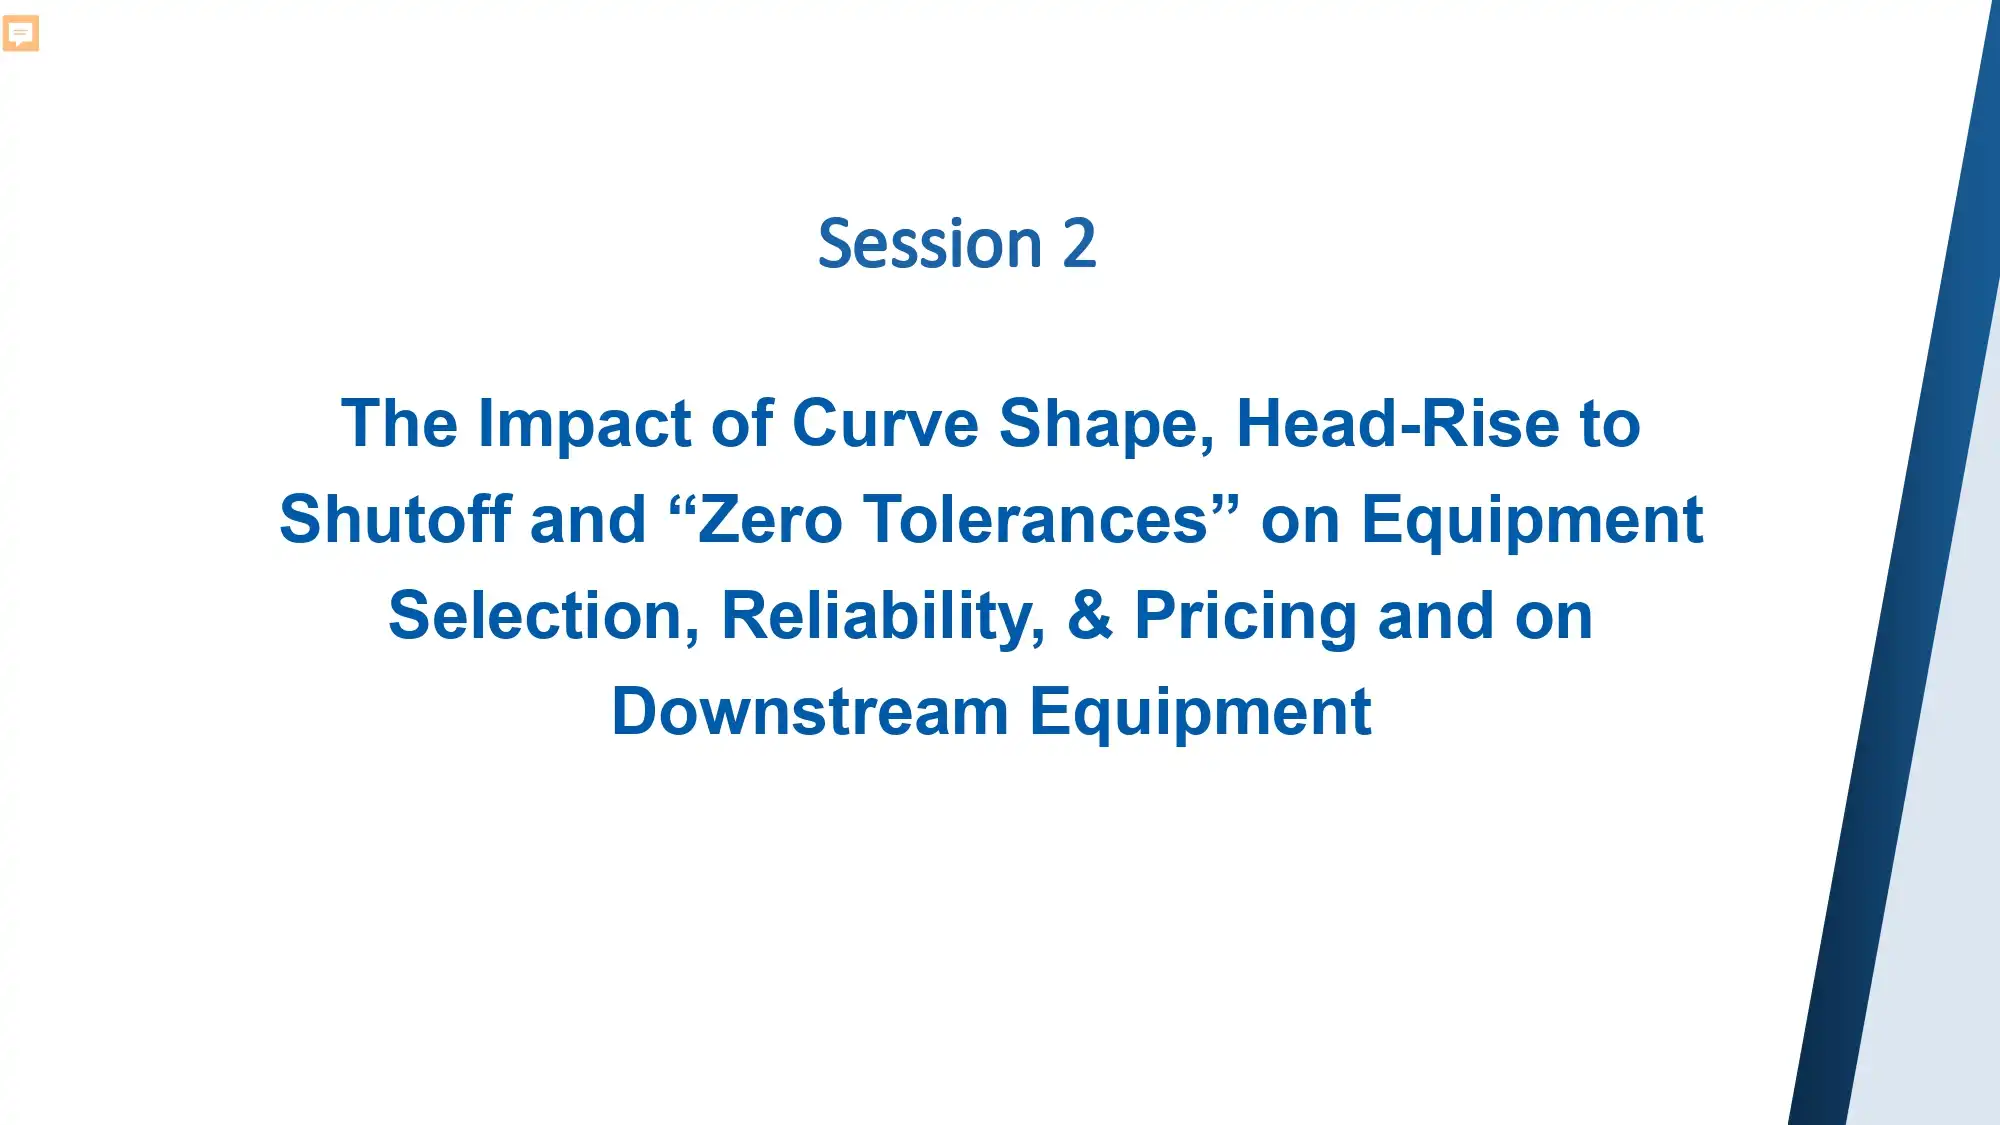 Session 2 The Impact of Curve Shape, Head-Rise to Shutoff and “Zero Tolerances” on Equipment Selection, Reliability, & Pricing and on Downstream Equipment